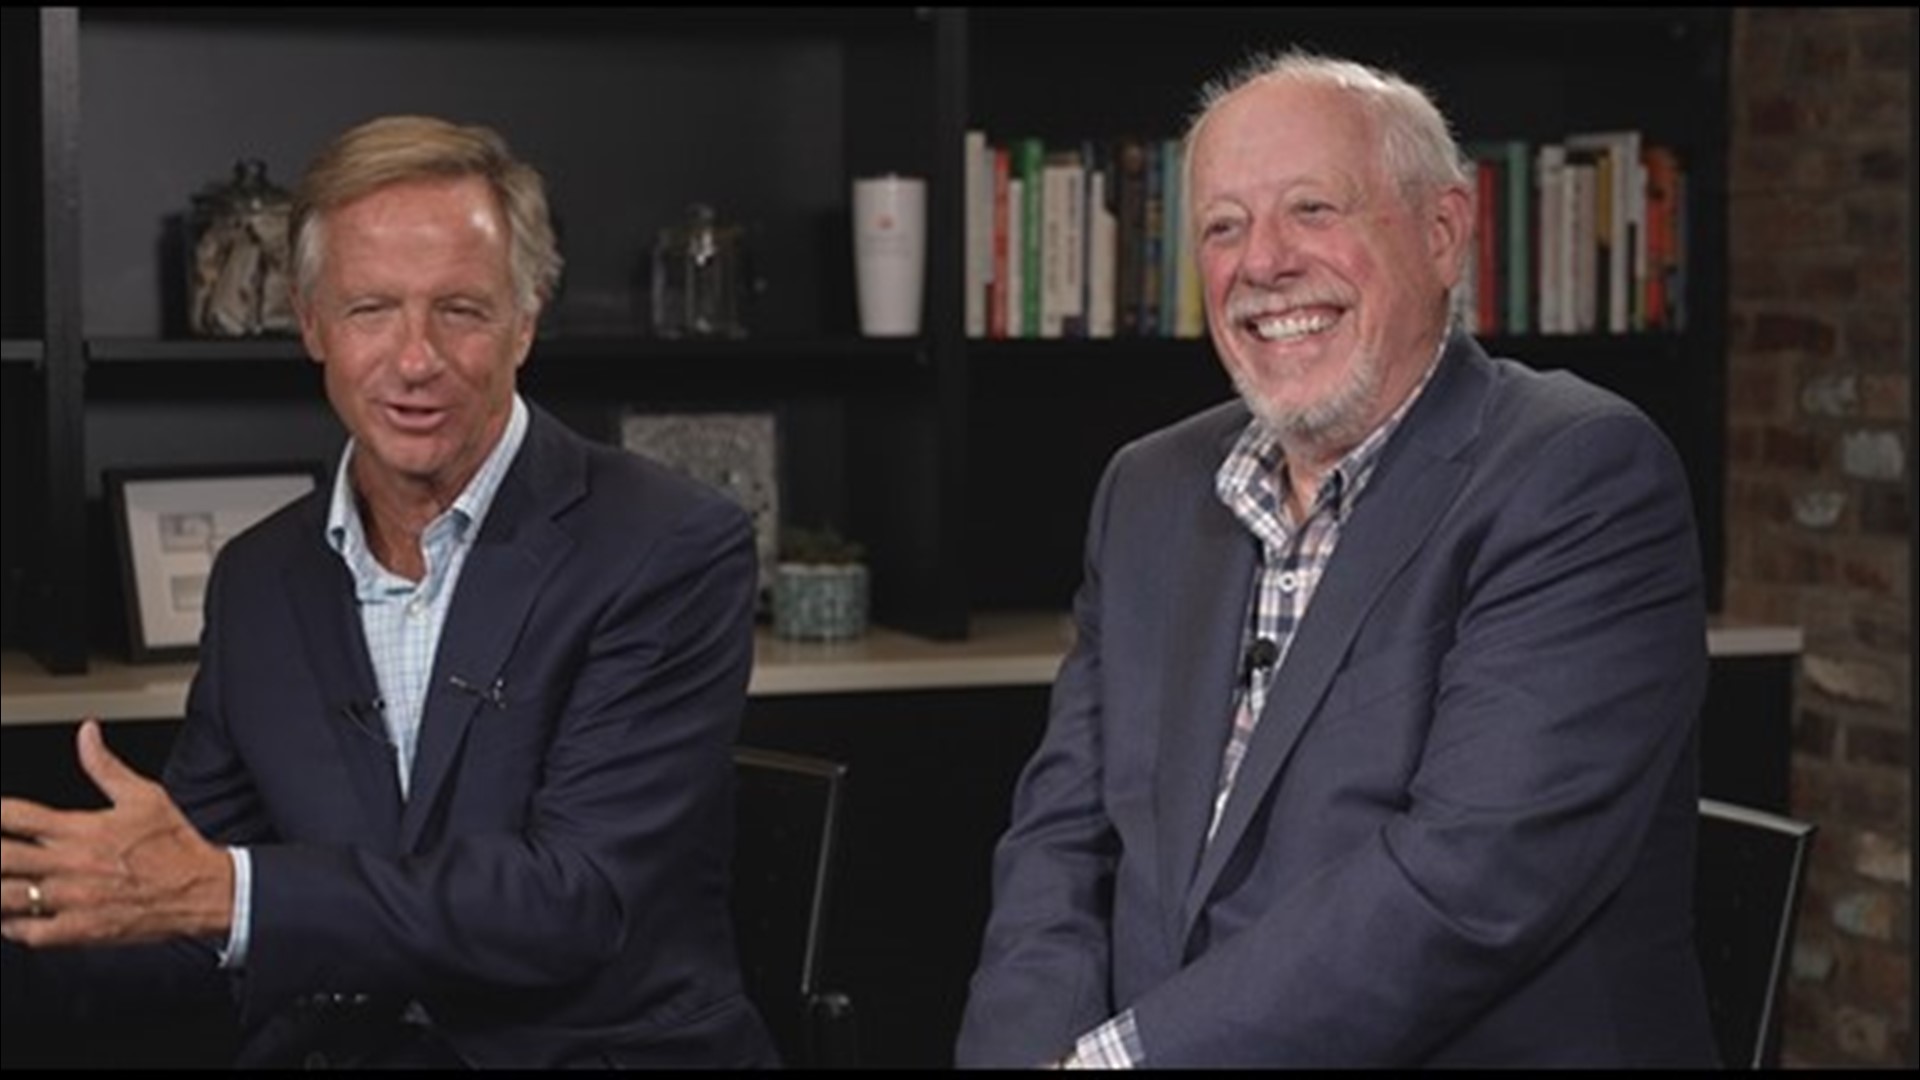 Former Tennessee Govs. Phil Bredesen and Bill Haslam talk about their podcast, "You Might Be Right."